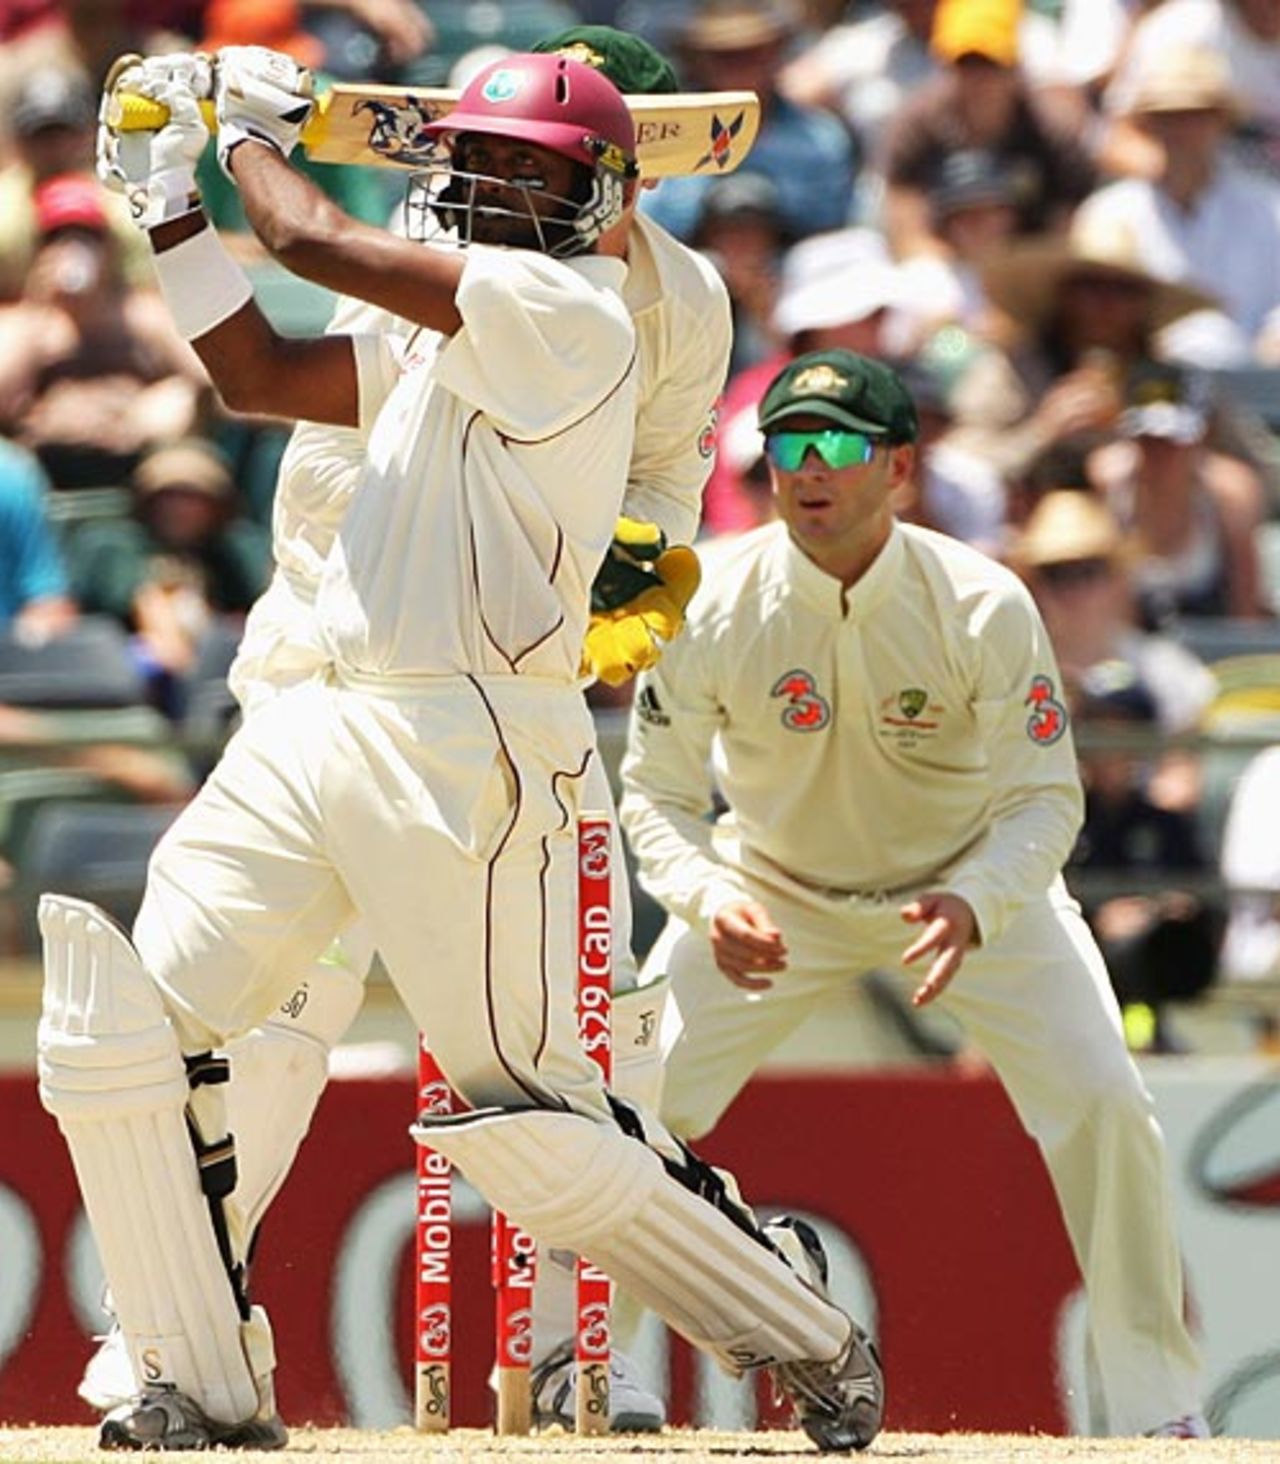 Narsingh Deonarine pulls during his fifty, Australia v West Indies, 3rd Test, Perth, 4th day, December 19, 2009